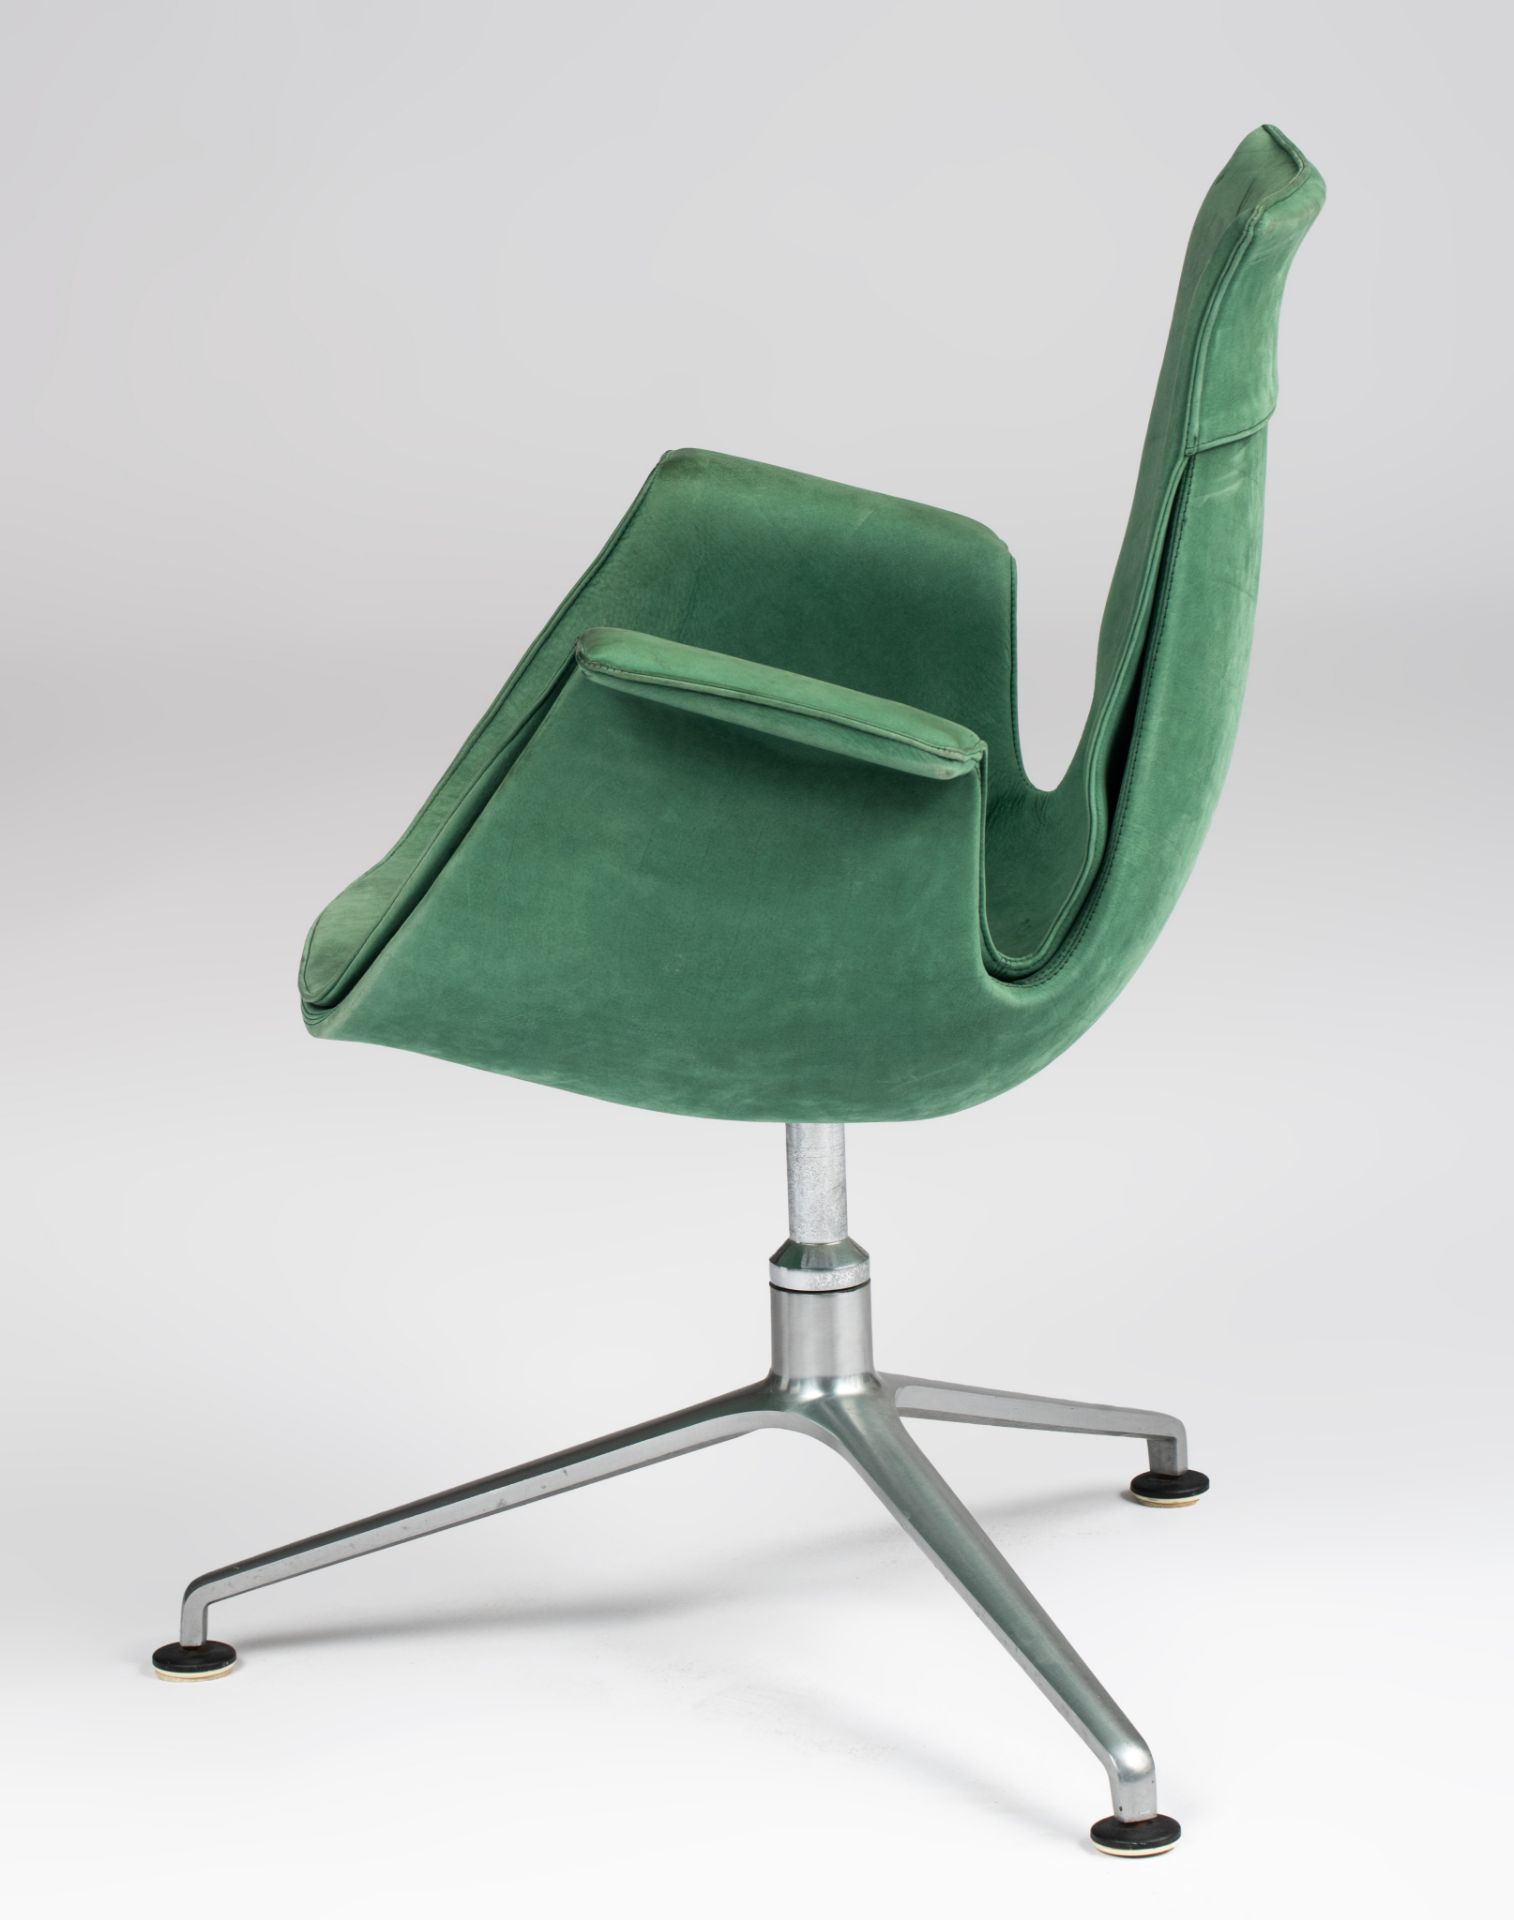 A FK 6725 Bird Chair, design by Preben Fabricius and Jorgen Kastholm for Alfred Kill International, - Image 4 of 9